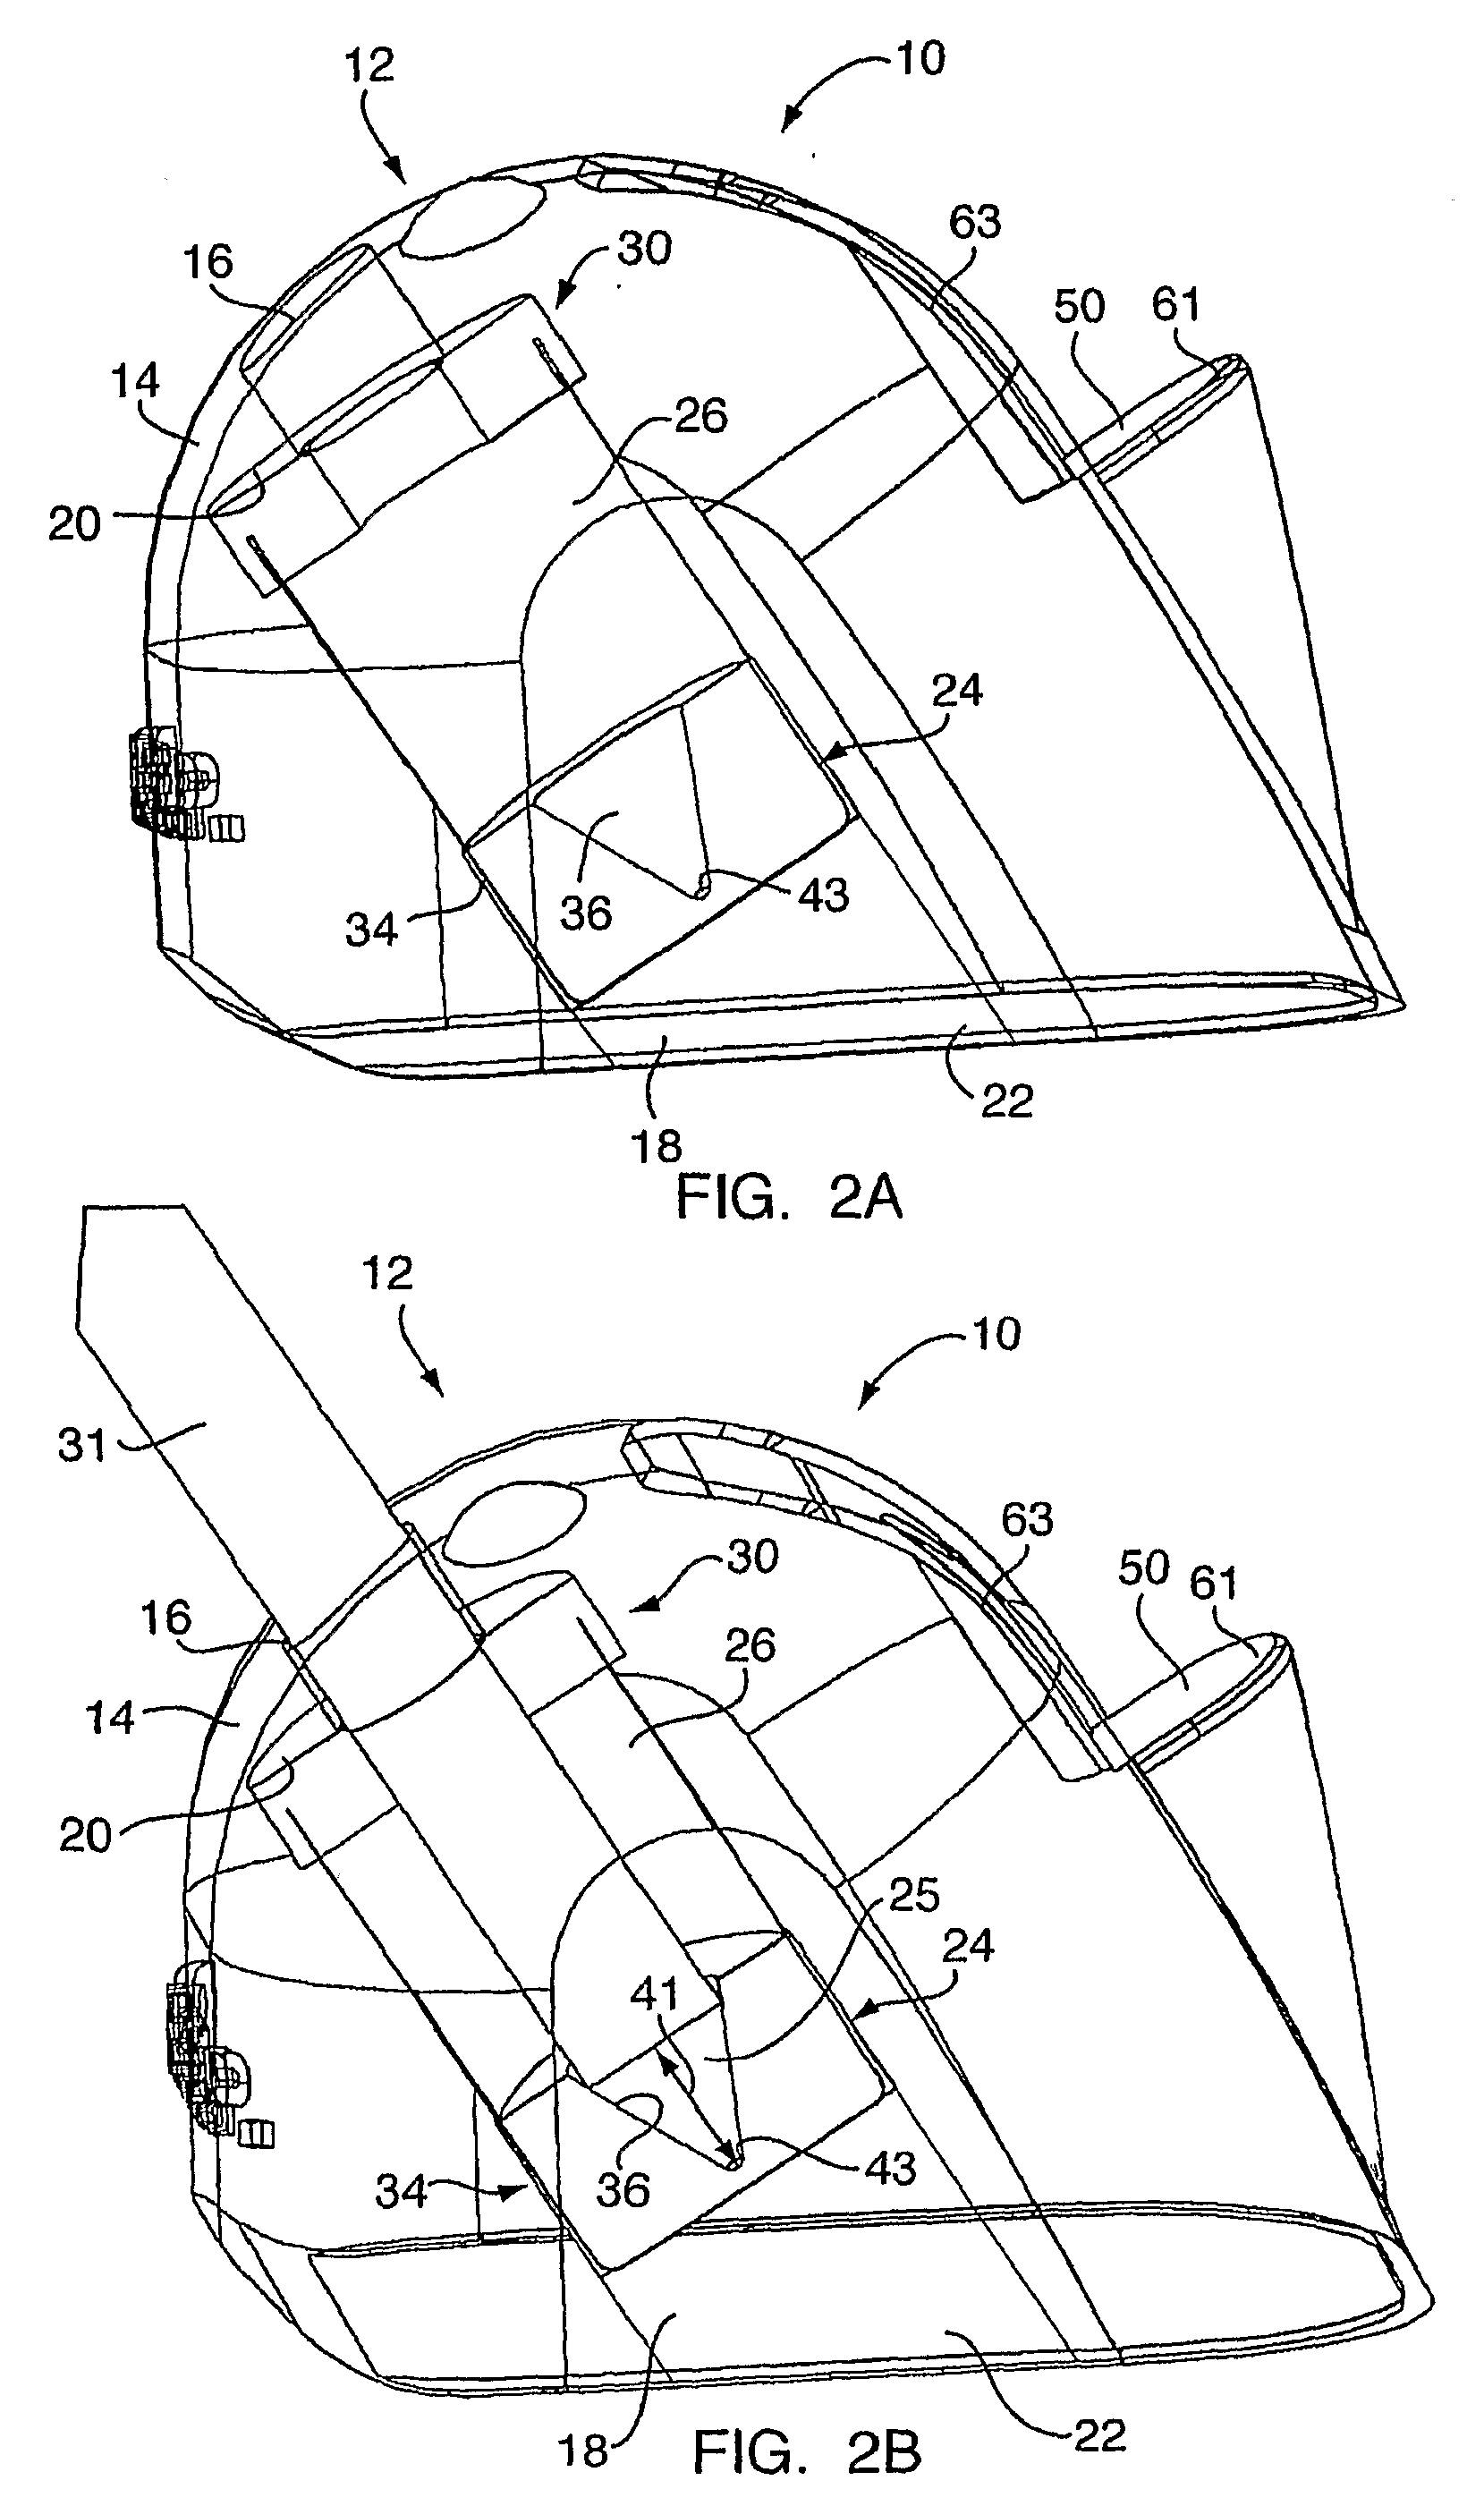 Device For White Balancing And Appying An Anti-Fog Agent To Medical Videoscopes Prior To Medical Procedures